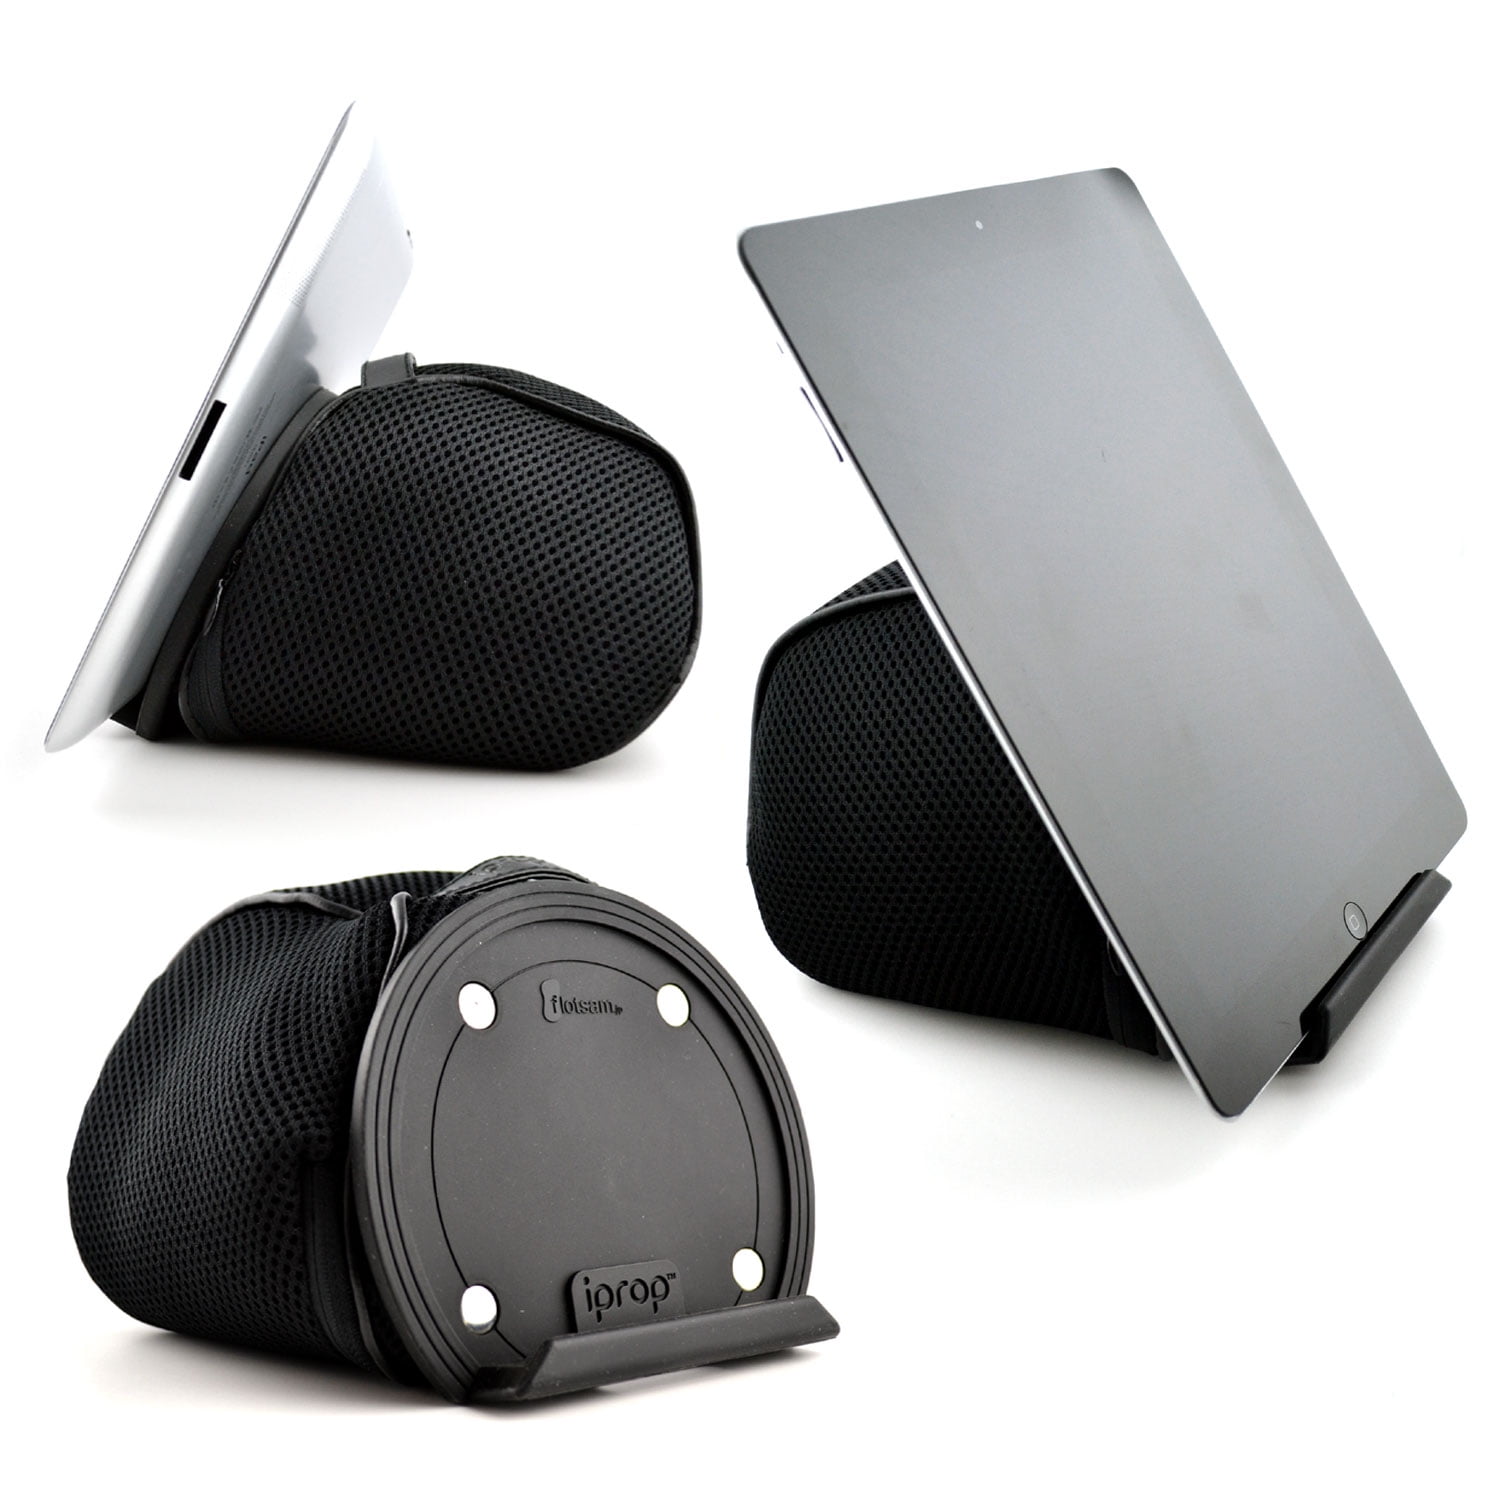 iProp Universal Tablet & iPad Bean Bag Stand for bed, couch, travel,  lounging. - Dockem